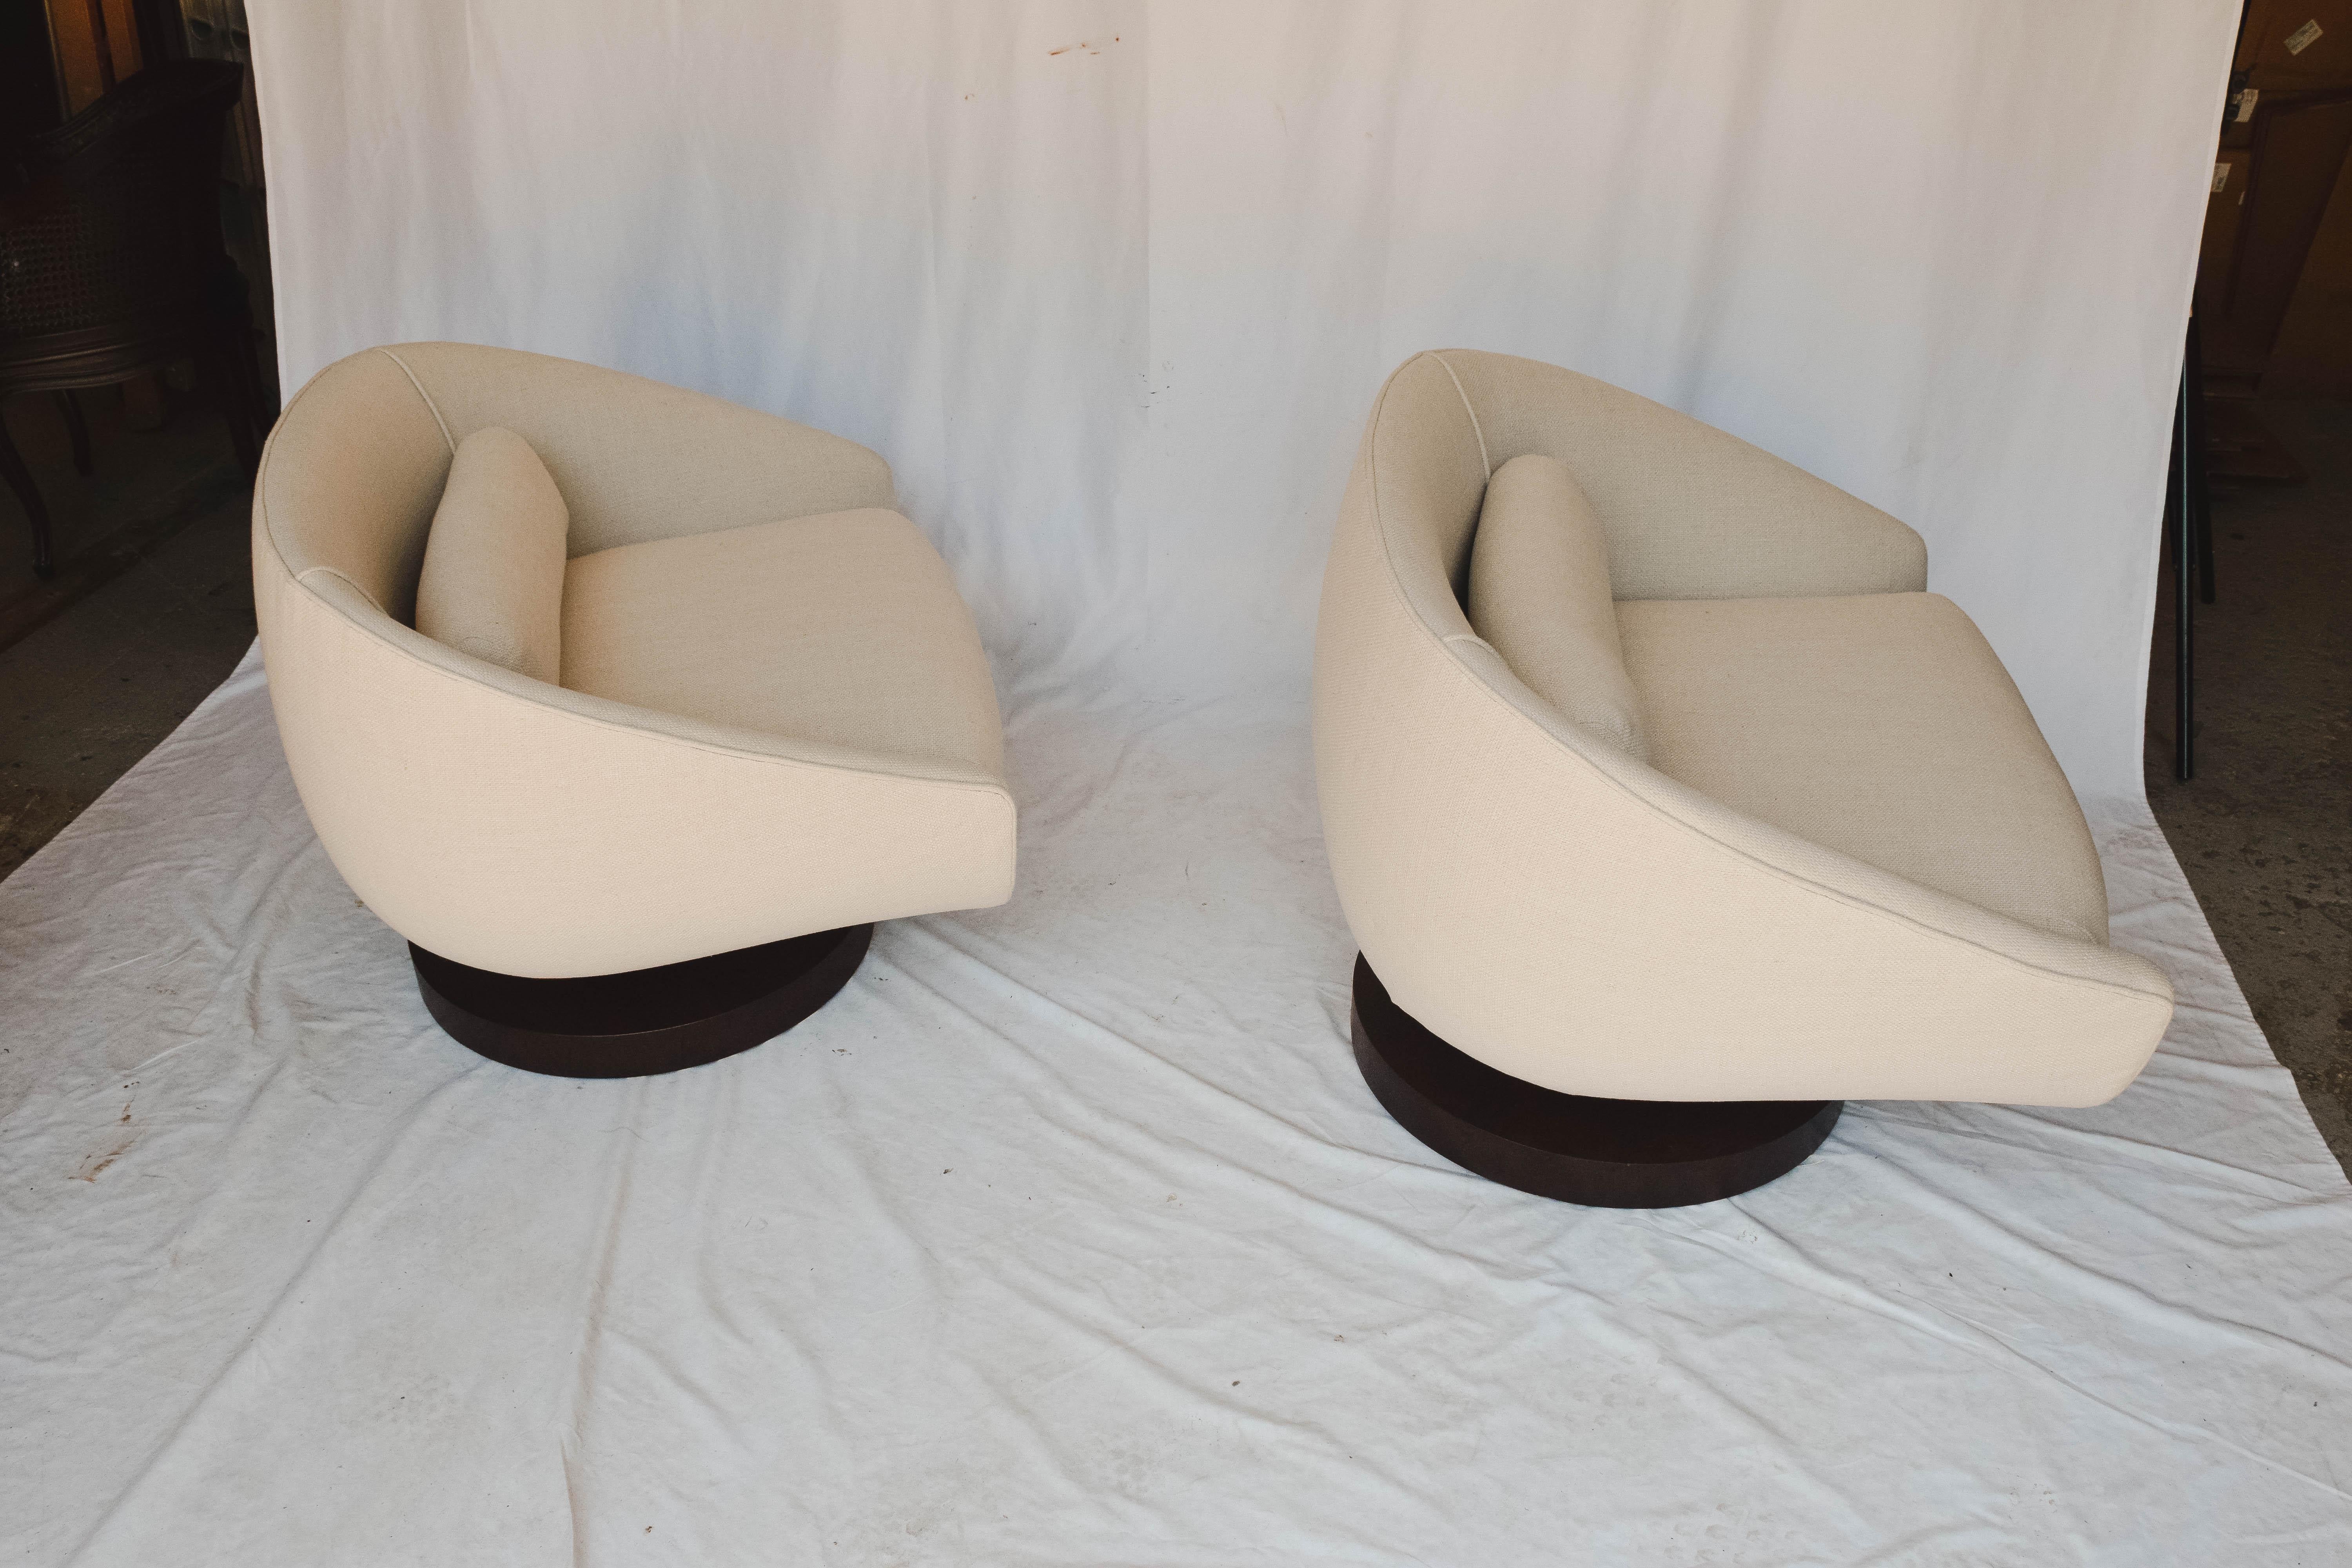 Pair of Mid-Century Modern Swivel Chairs, in the style of Milo Baughman 1